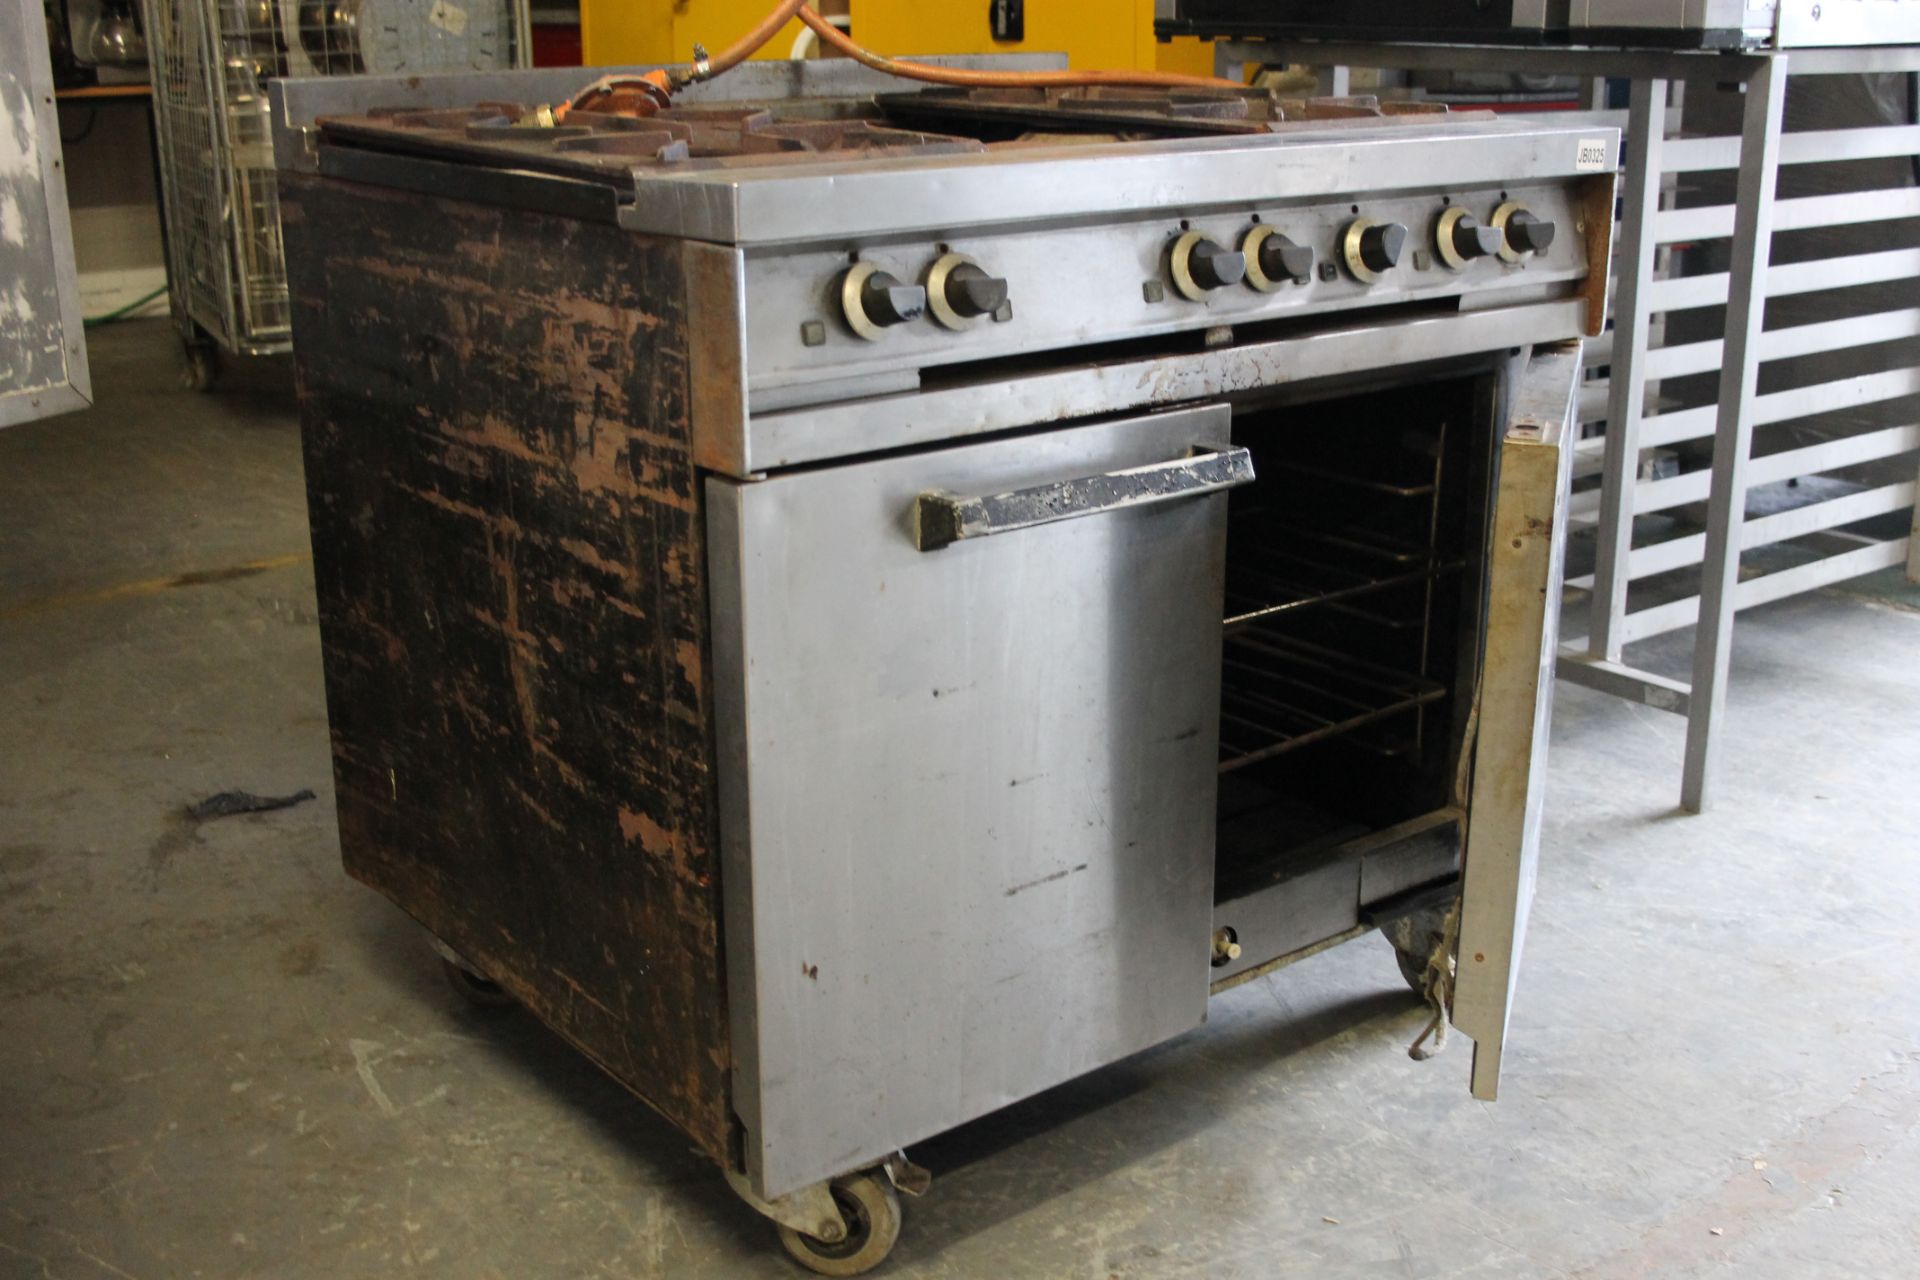 Falcon Dominator Six Burner Gas Cooker & Double Oven - as found - Image 2 of 3